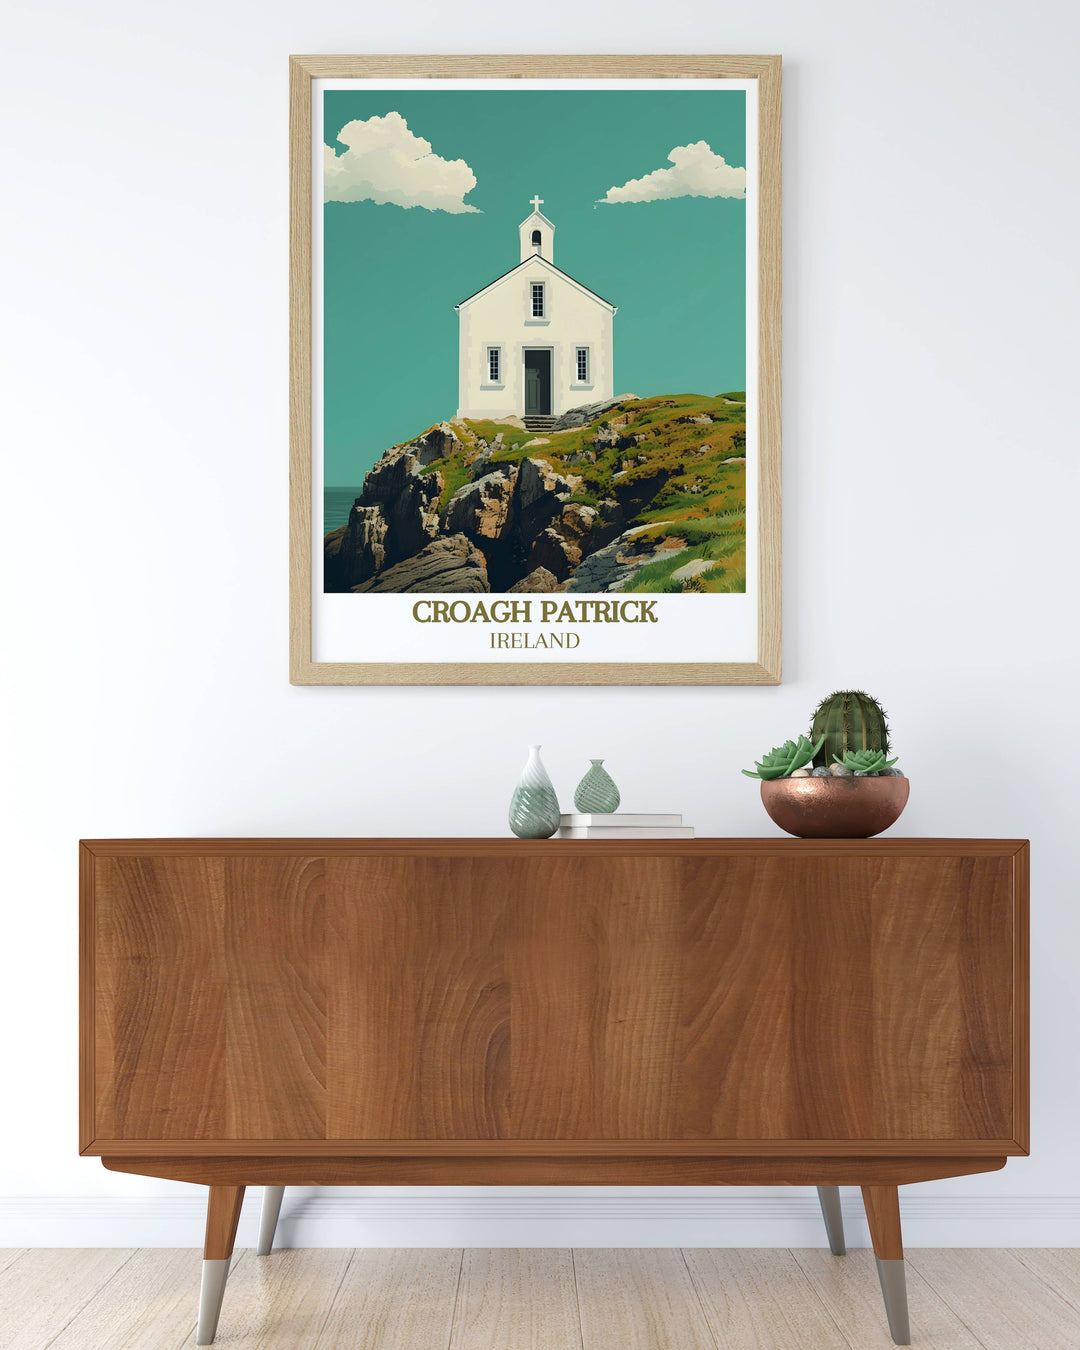 A vintage travel print showcasing the beauty of St Patricks Church and Croagh Patrick in County Mayo Ireland. This framed print highlights the serene landscapes and spiritual history making it a wonderful addition to any travel inspired decor.